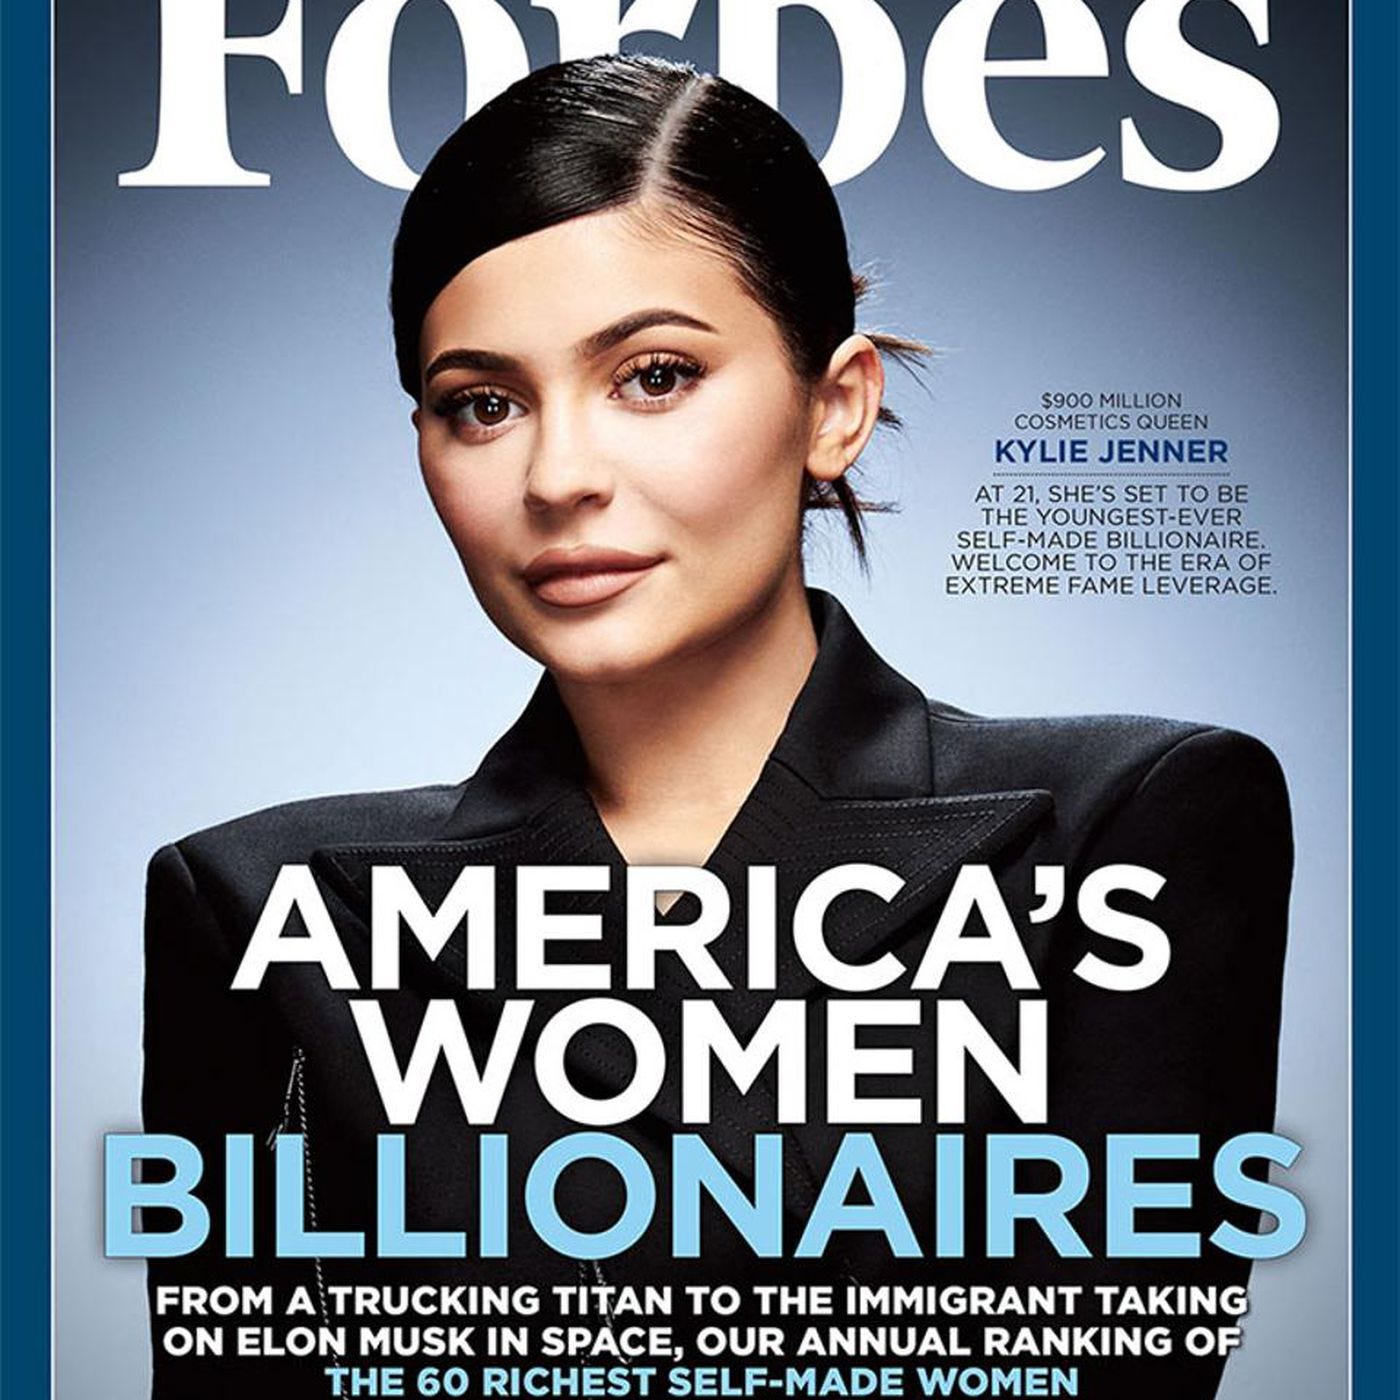 Kylie Jenner: The controversy over “Kylie Jenner, self-made billionaire,”  explained - Vox